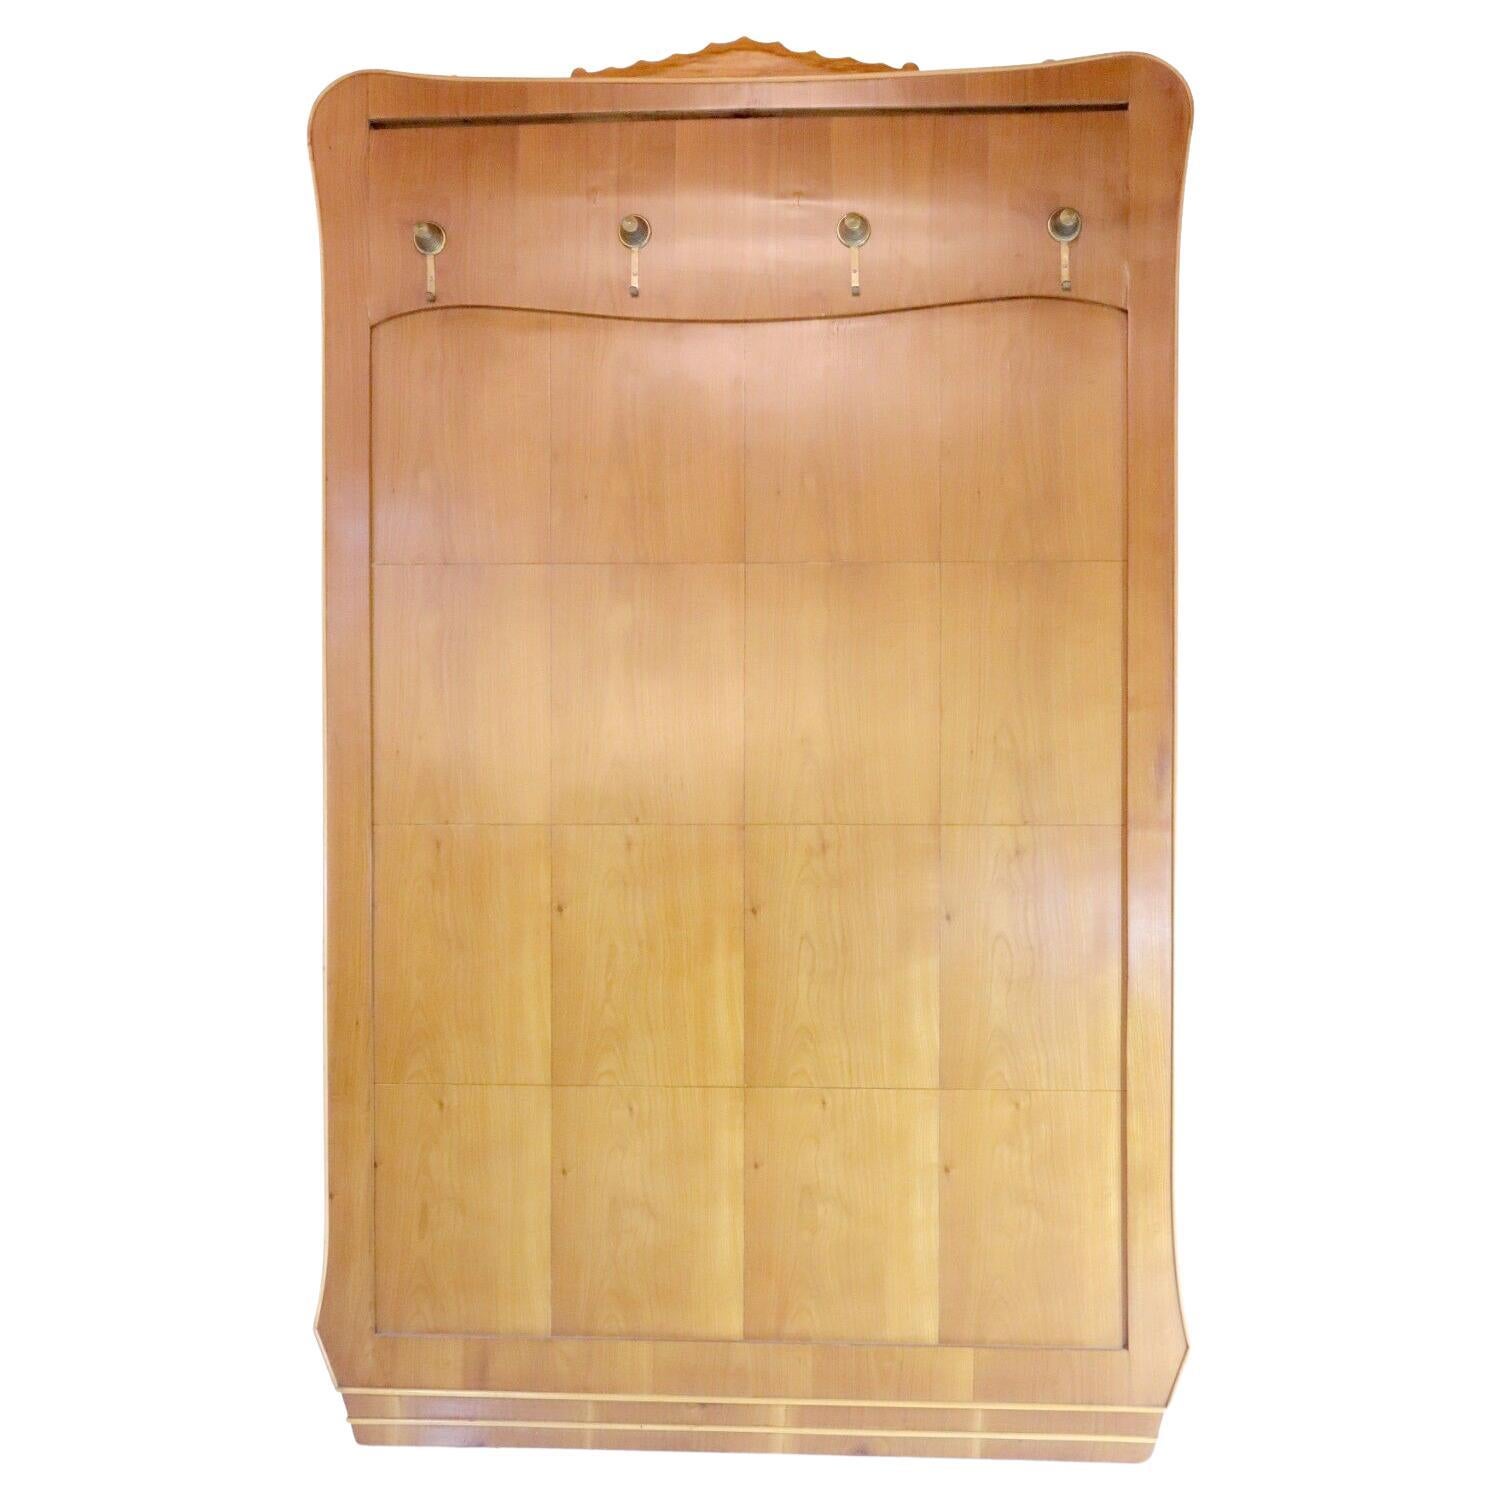 Italian Cherry Wall Panel / Coat Rack with Brass Hooks, 1950's For Sale